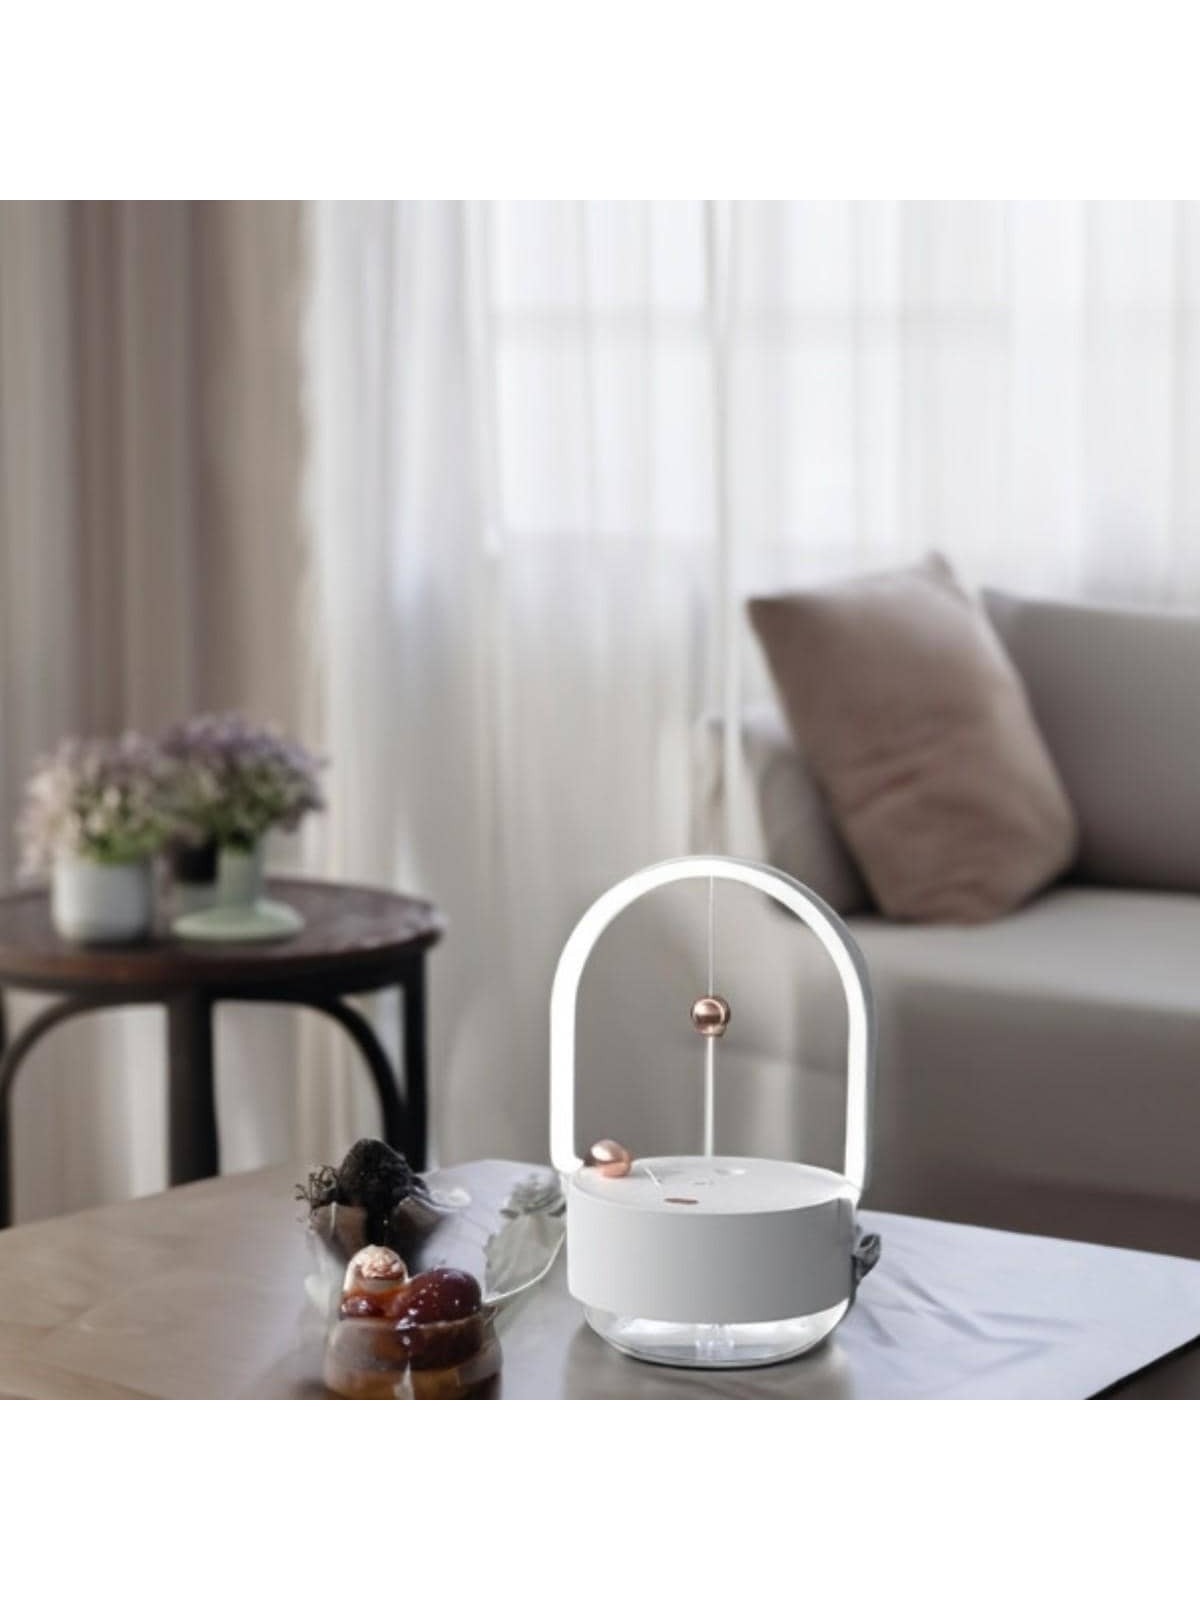 1pc ABS Humidifier, Modern White Desktop Atomizer Hydrating Device For Home